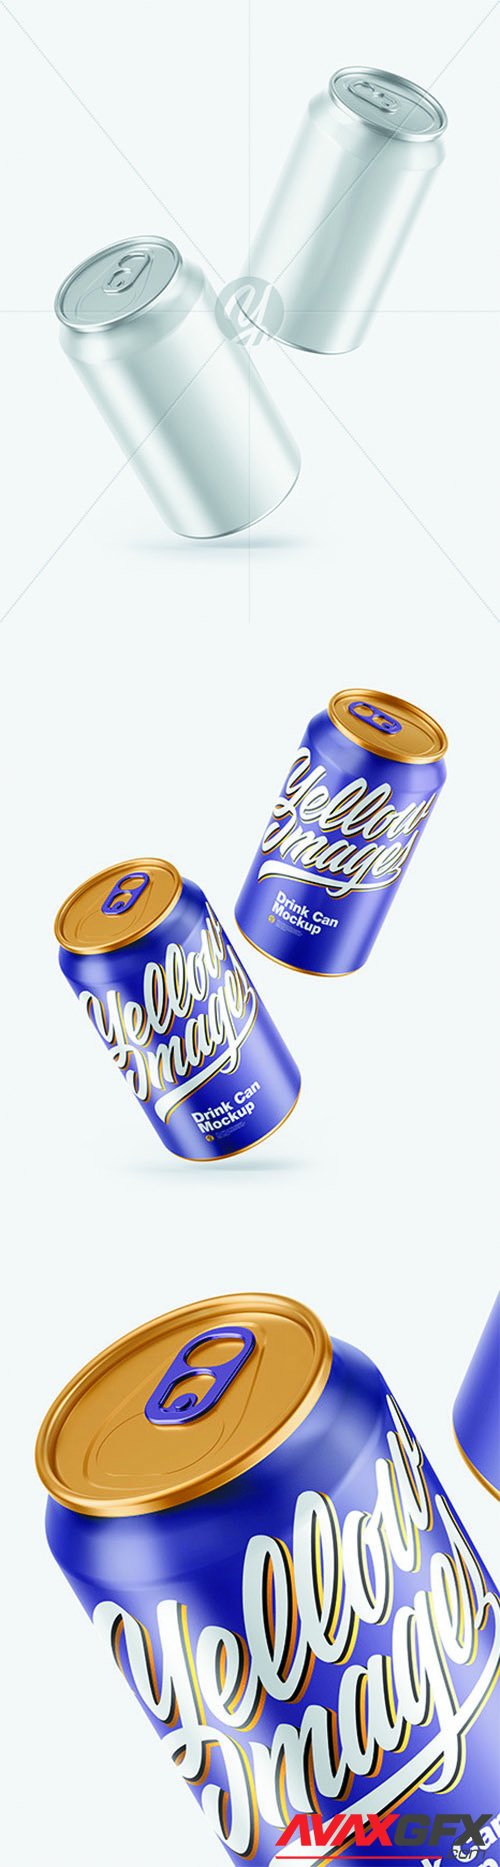 Two Metallic Drink Cans w/ Glossy Finish Mockup 68627